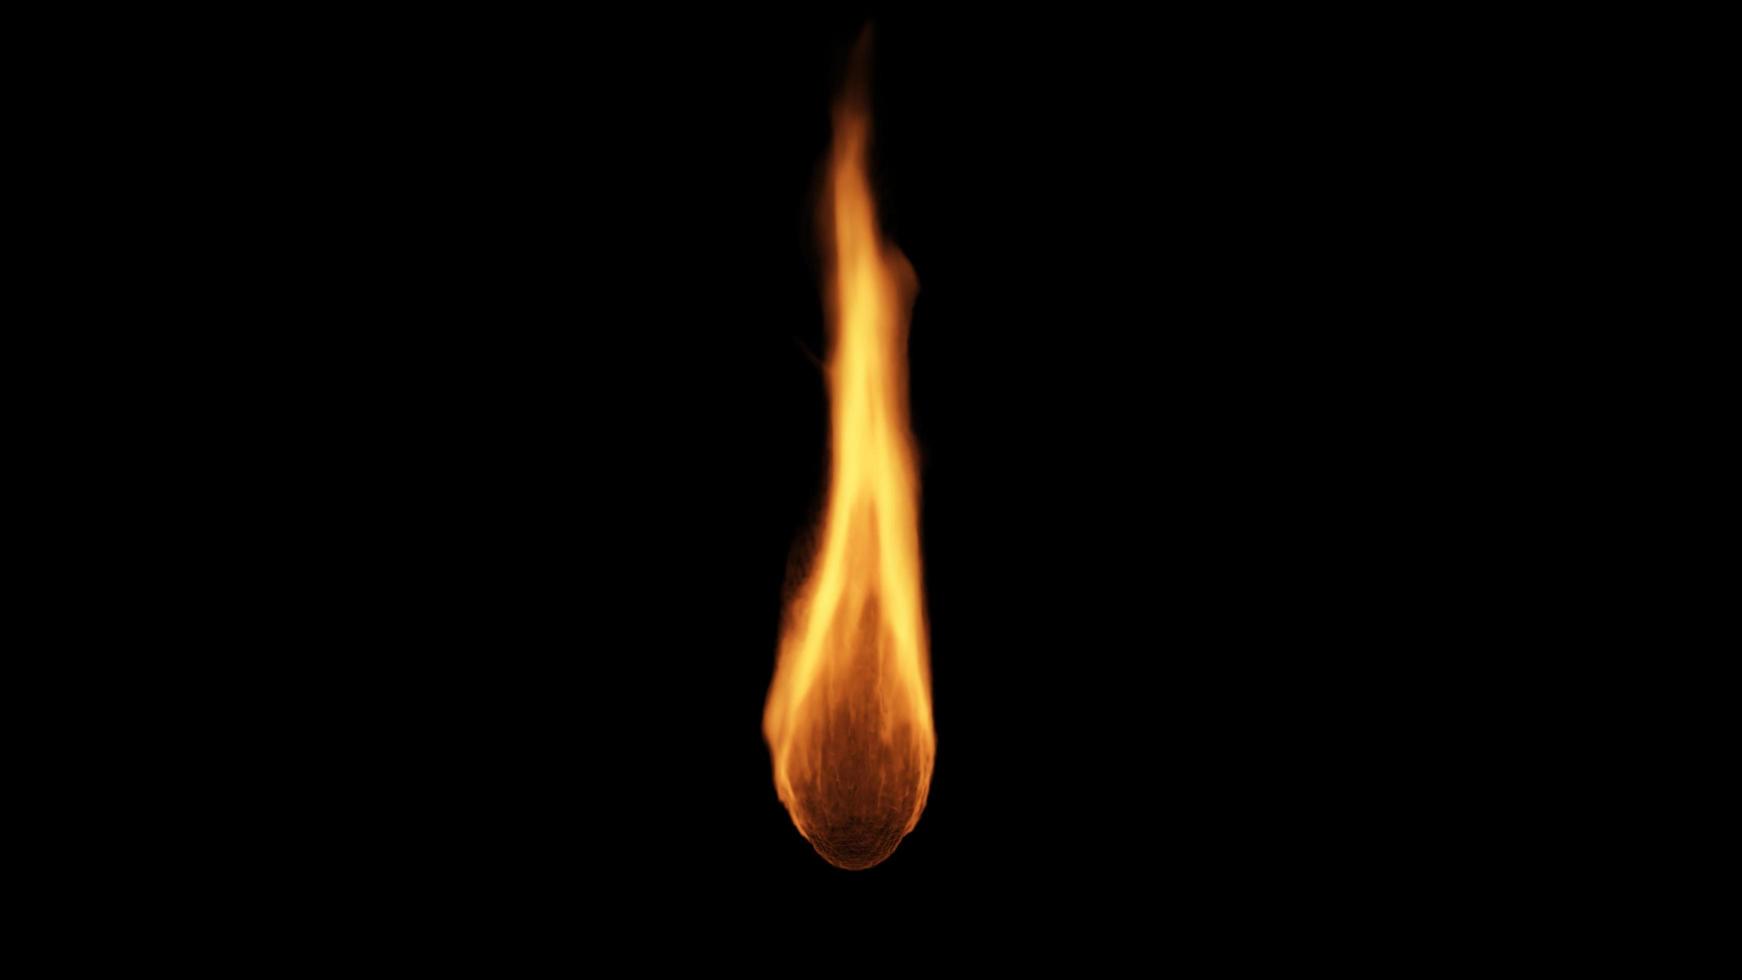 Flaming drop on black background photo